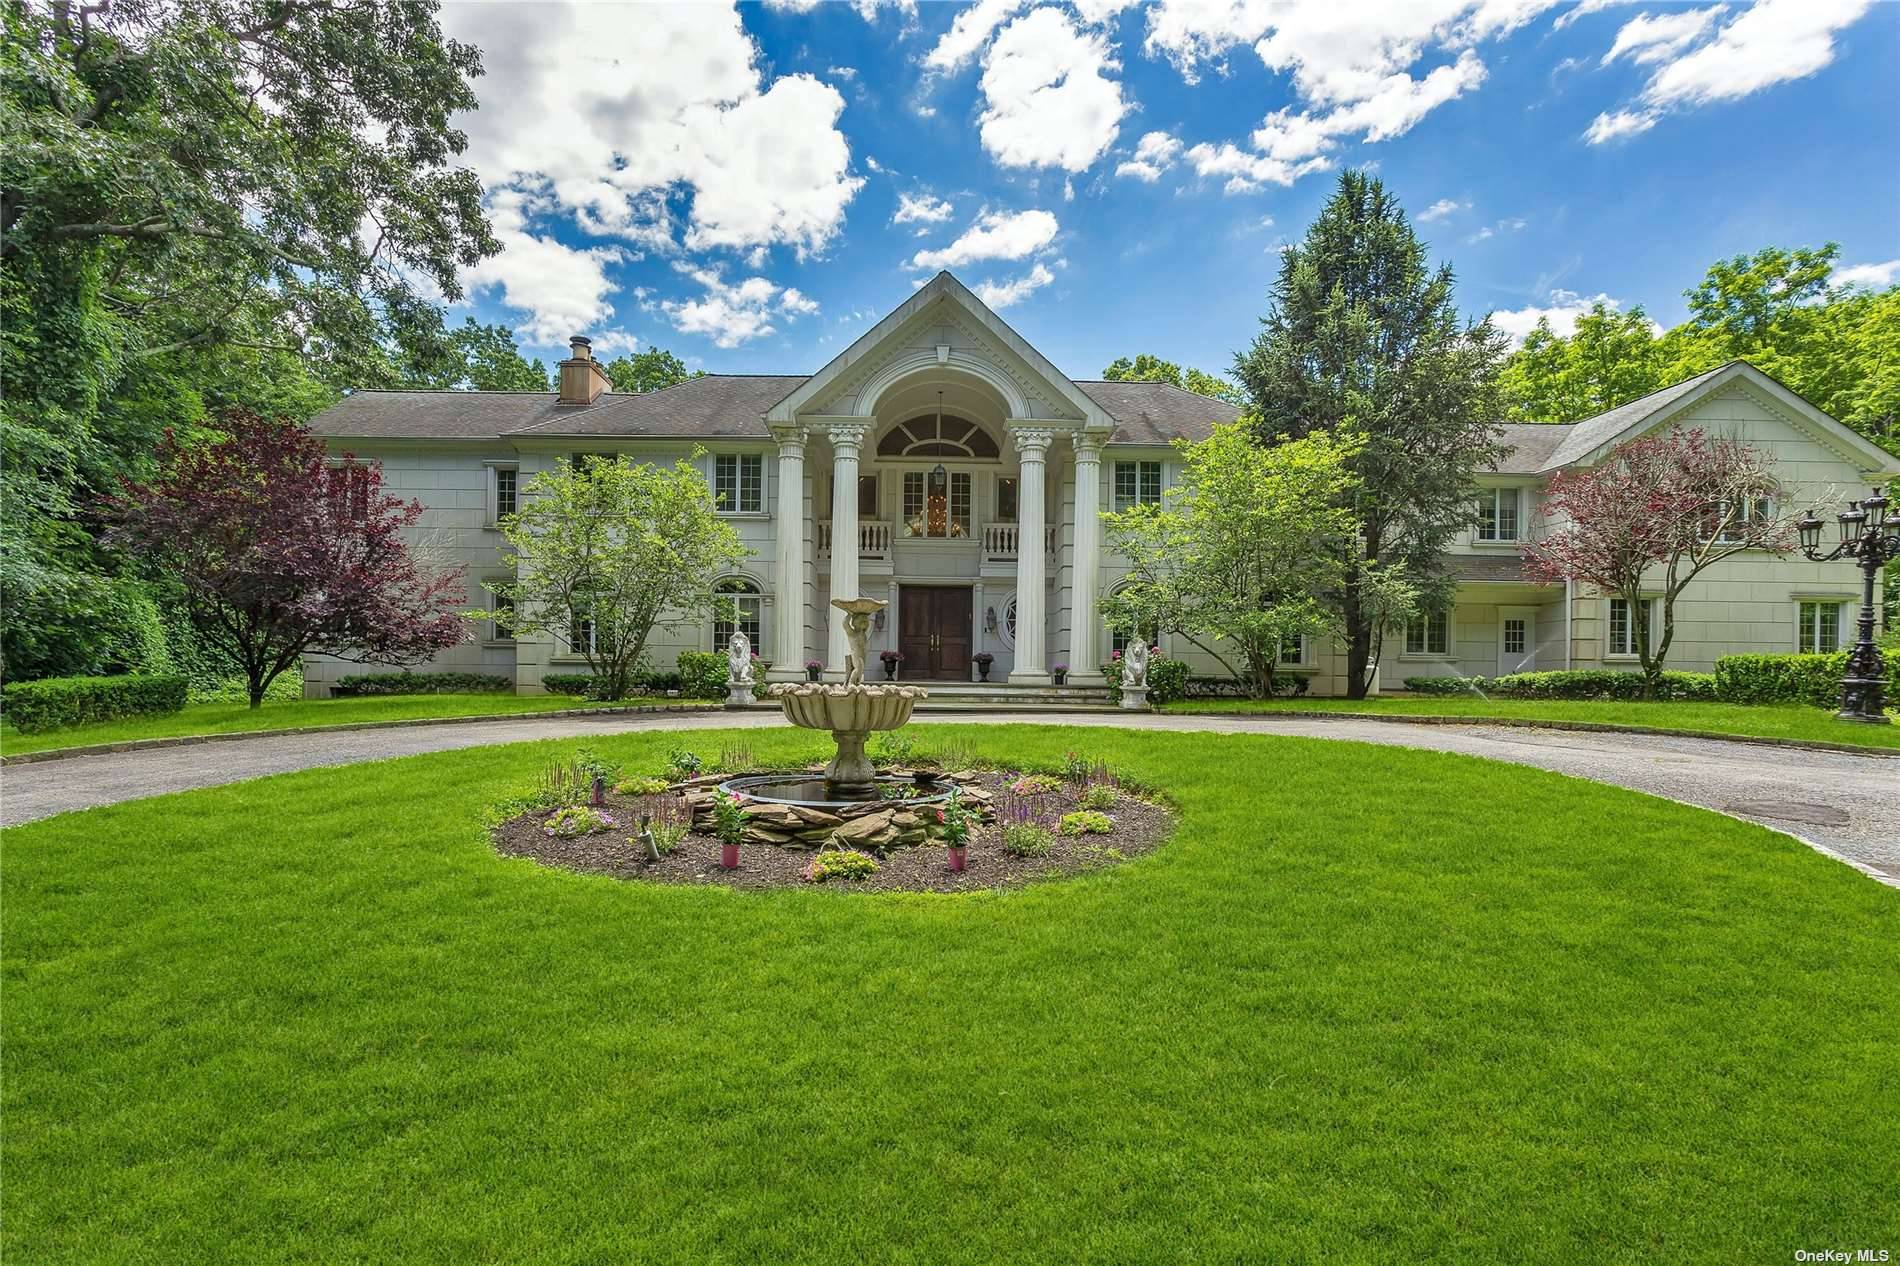 MILL NECK. Incredible Stone amp ; Stucco Gated Colonial, Custom Built, amp ; Located On Over 5 Private, Beautiful amp ; Wooded Acres, In The Heart of The Village of ...